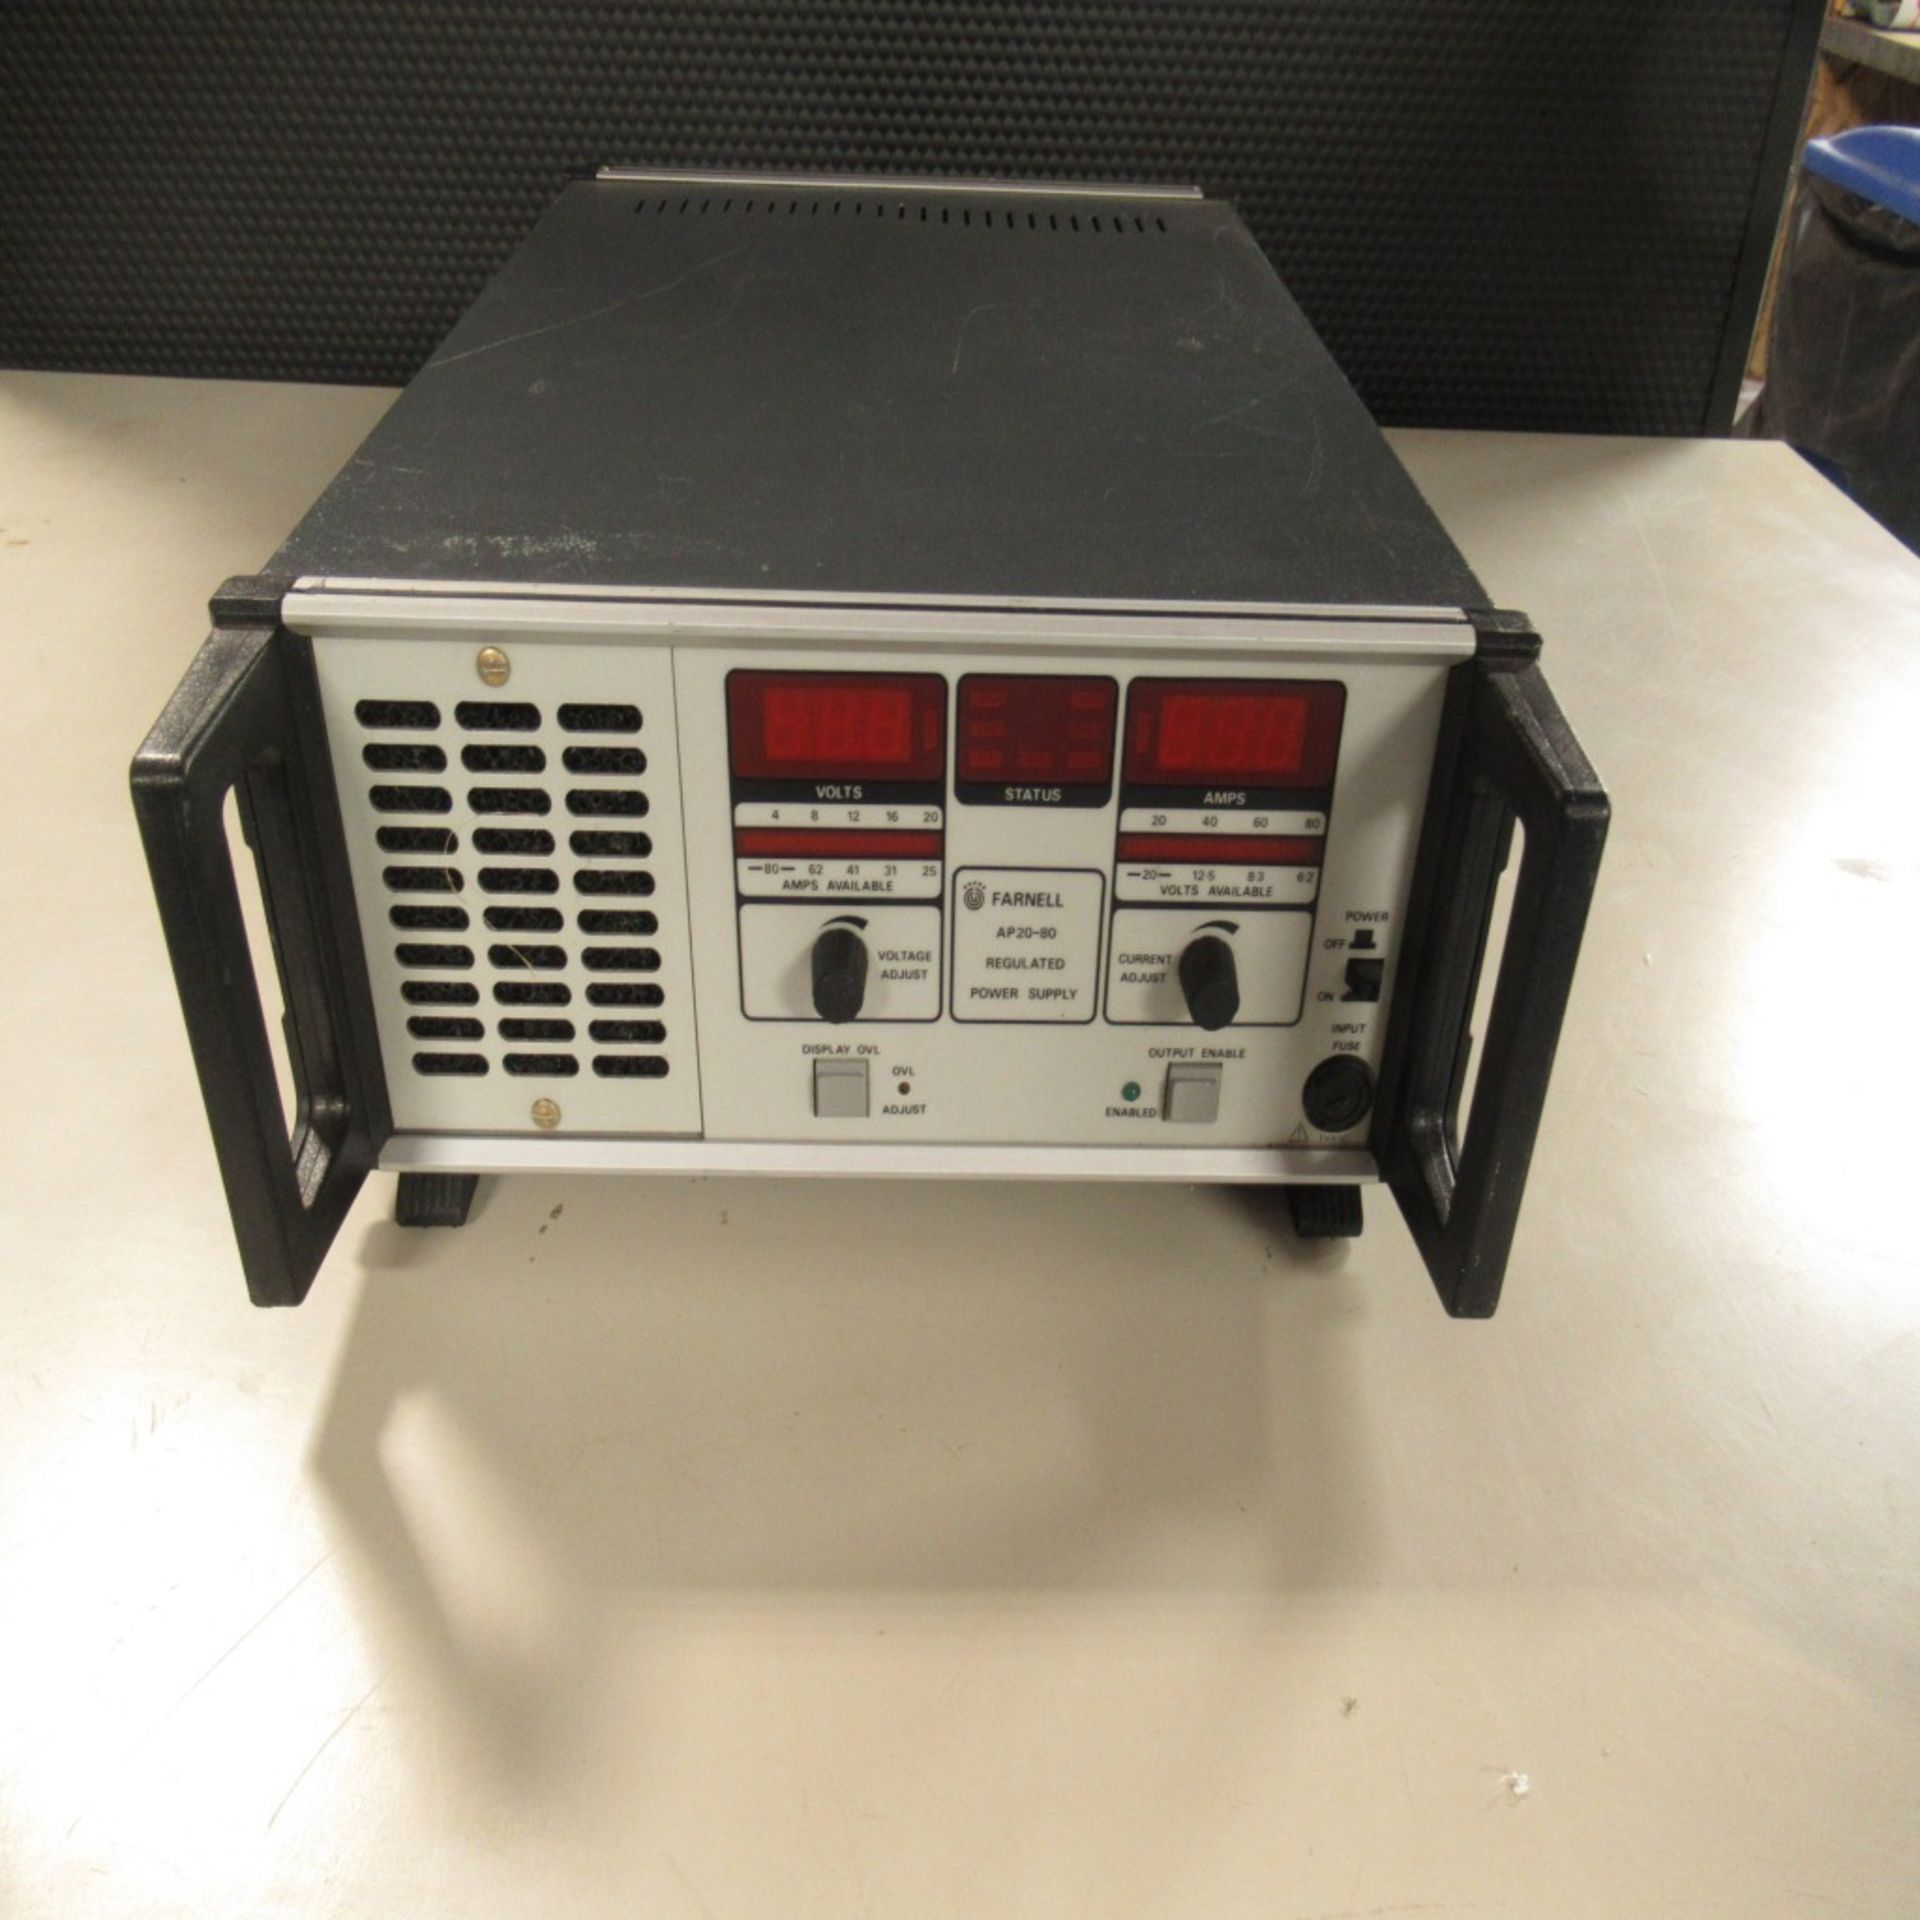 PHOTON SNAP SHOT MODEL 6000 *POWERS ON* NO SCREEN DISPLAY; FARNELL AP20-80 REGULATED POWER SUPPLY * - Image 6 of 222